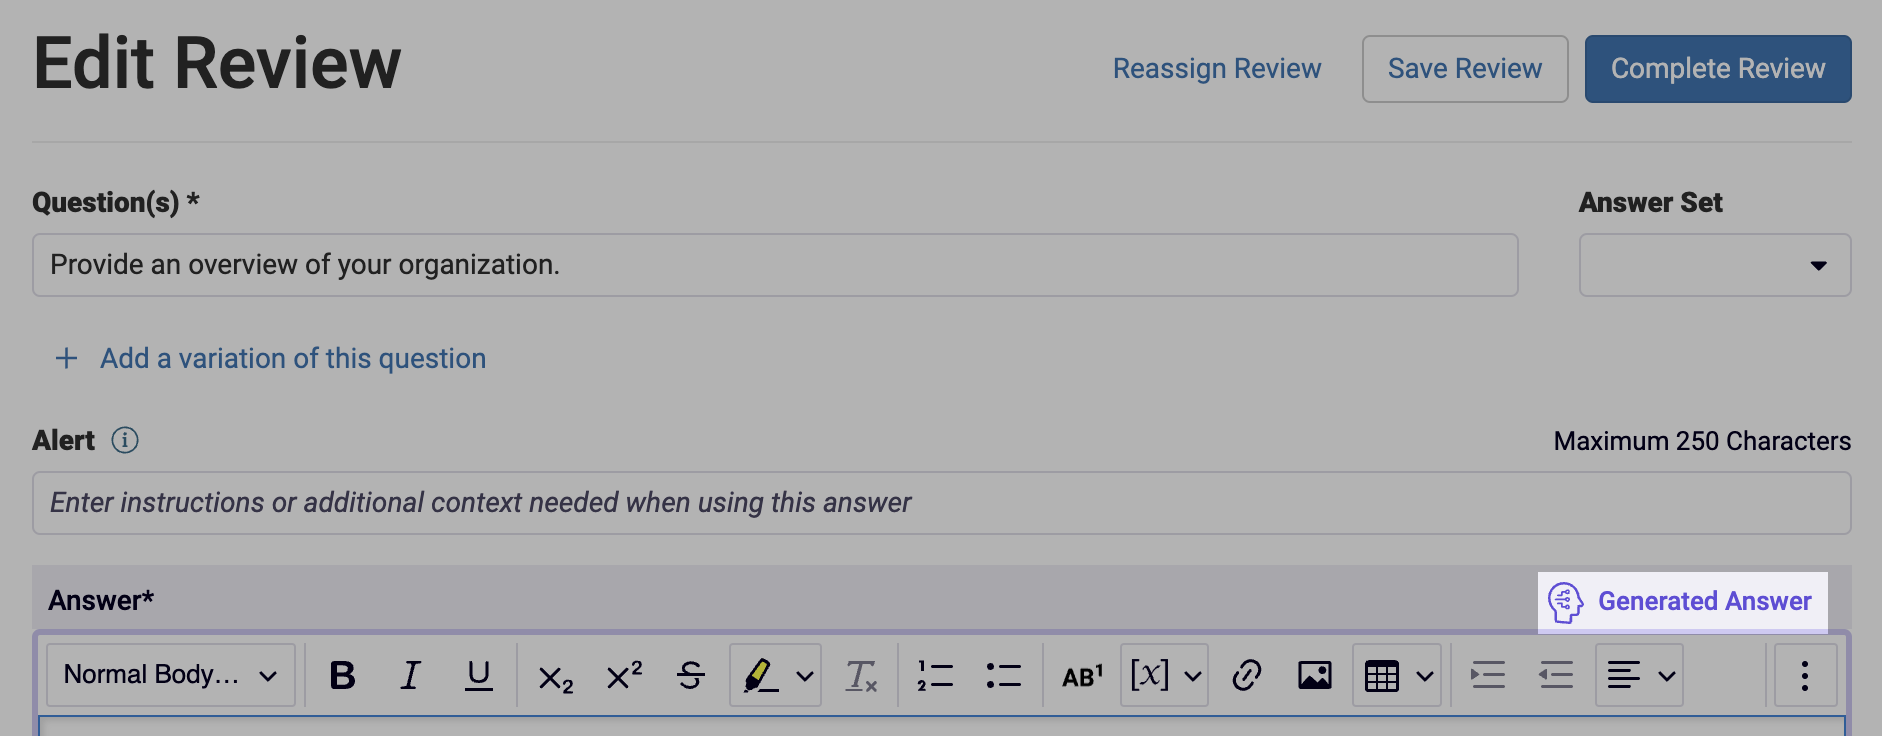 Generated Answer marker when editing a Library Review.png